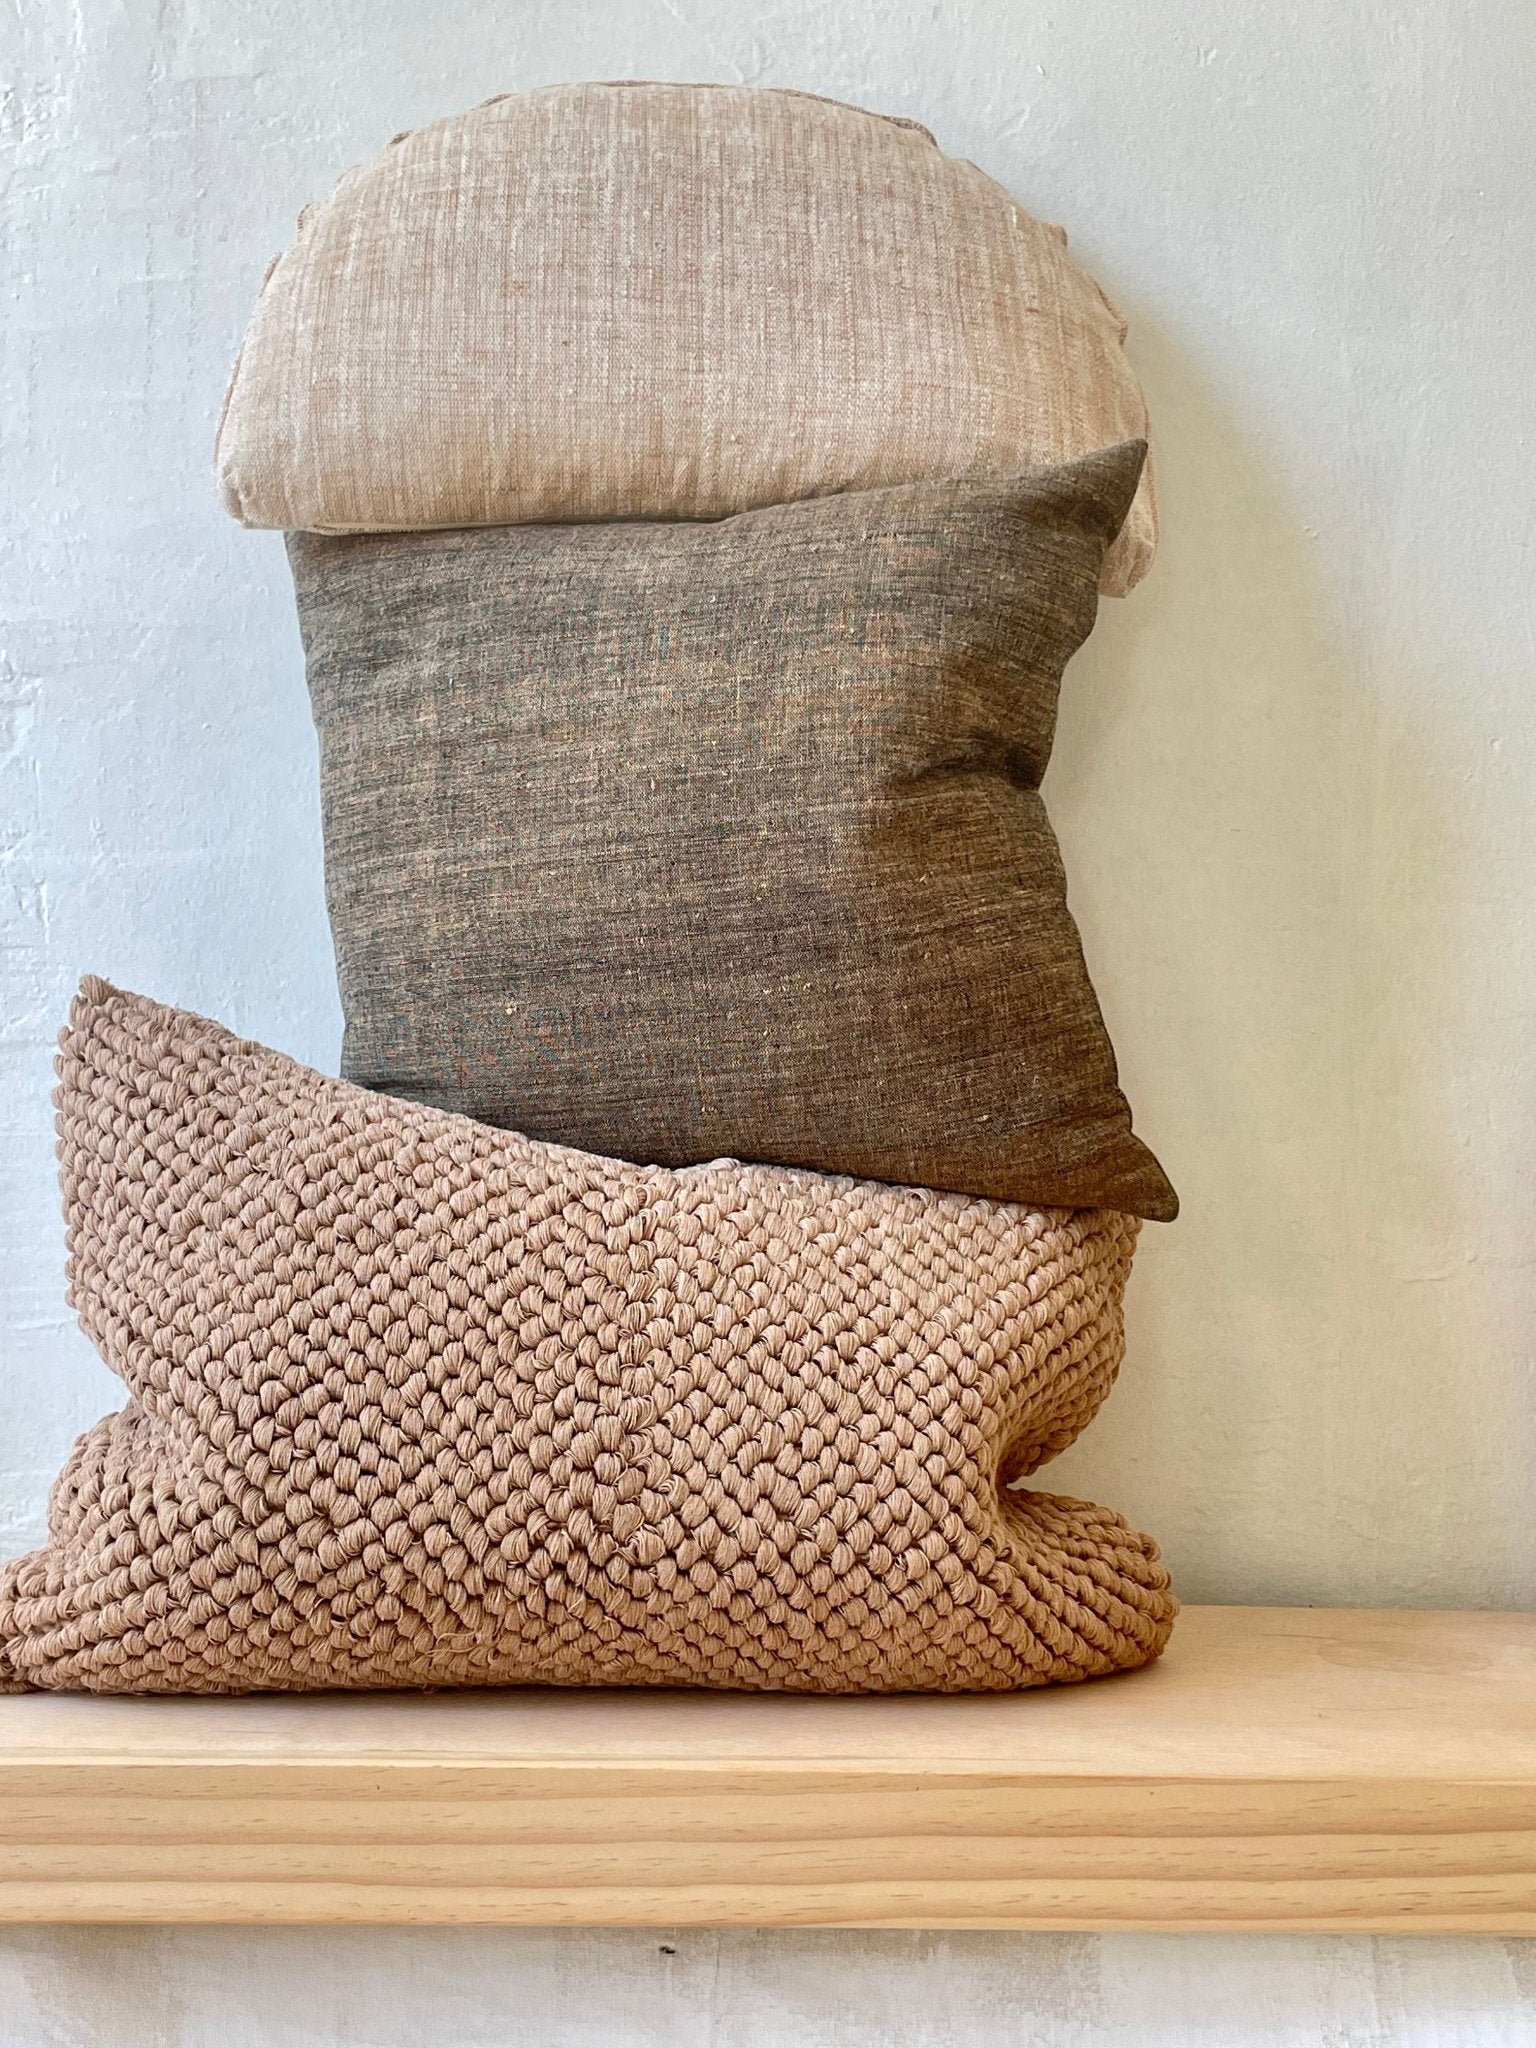 Pillow bundle - Earthy & Warm - Behind the Hill